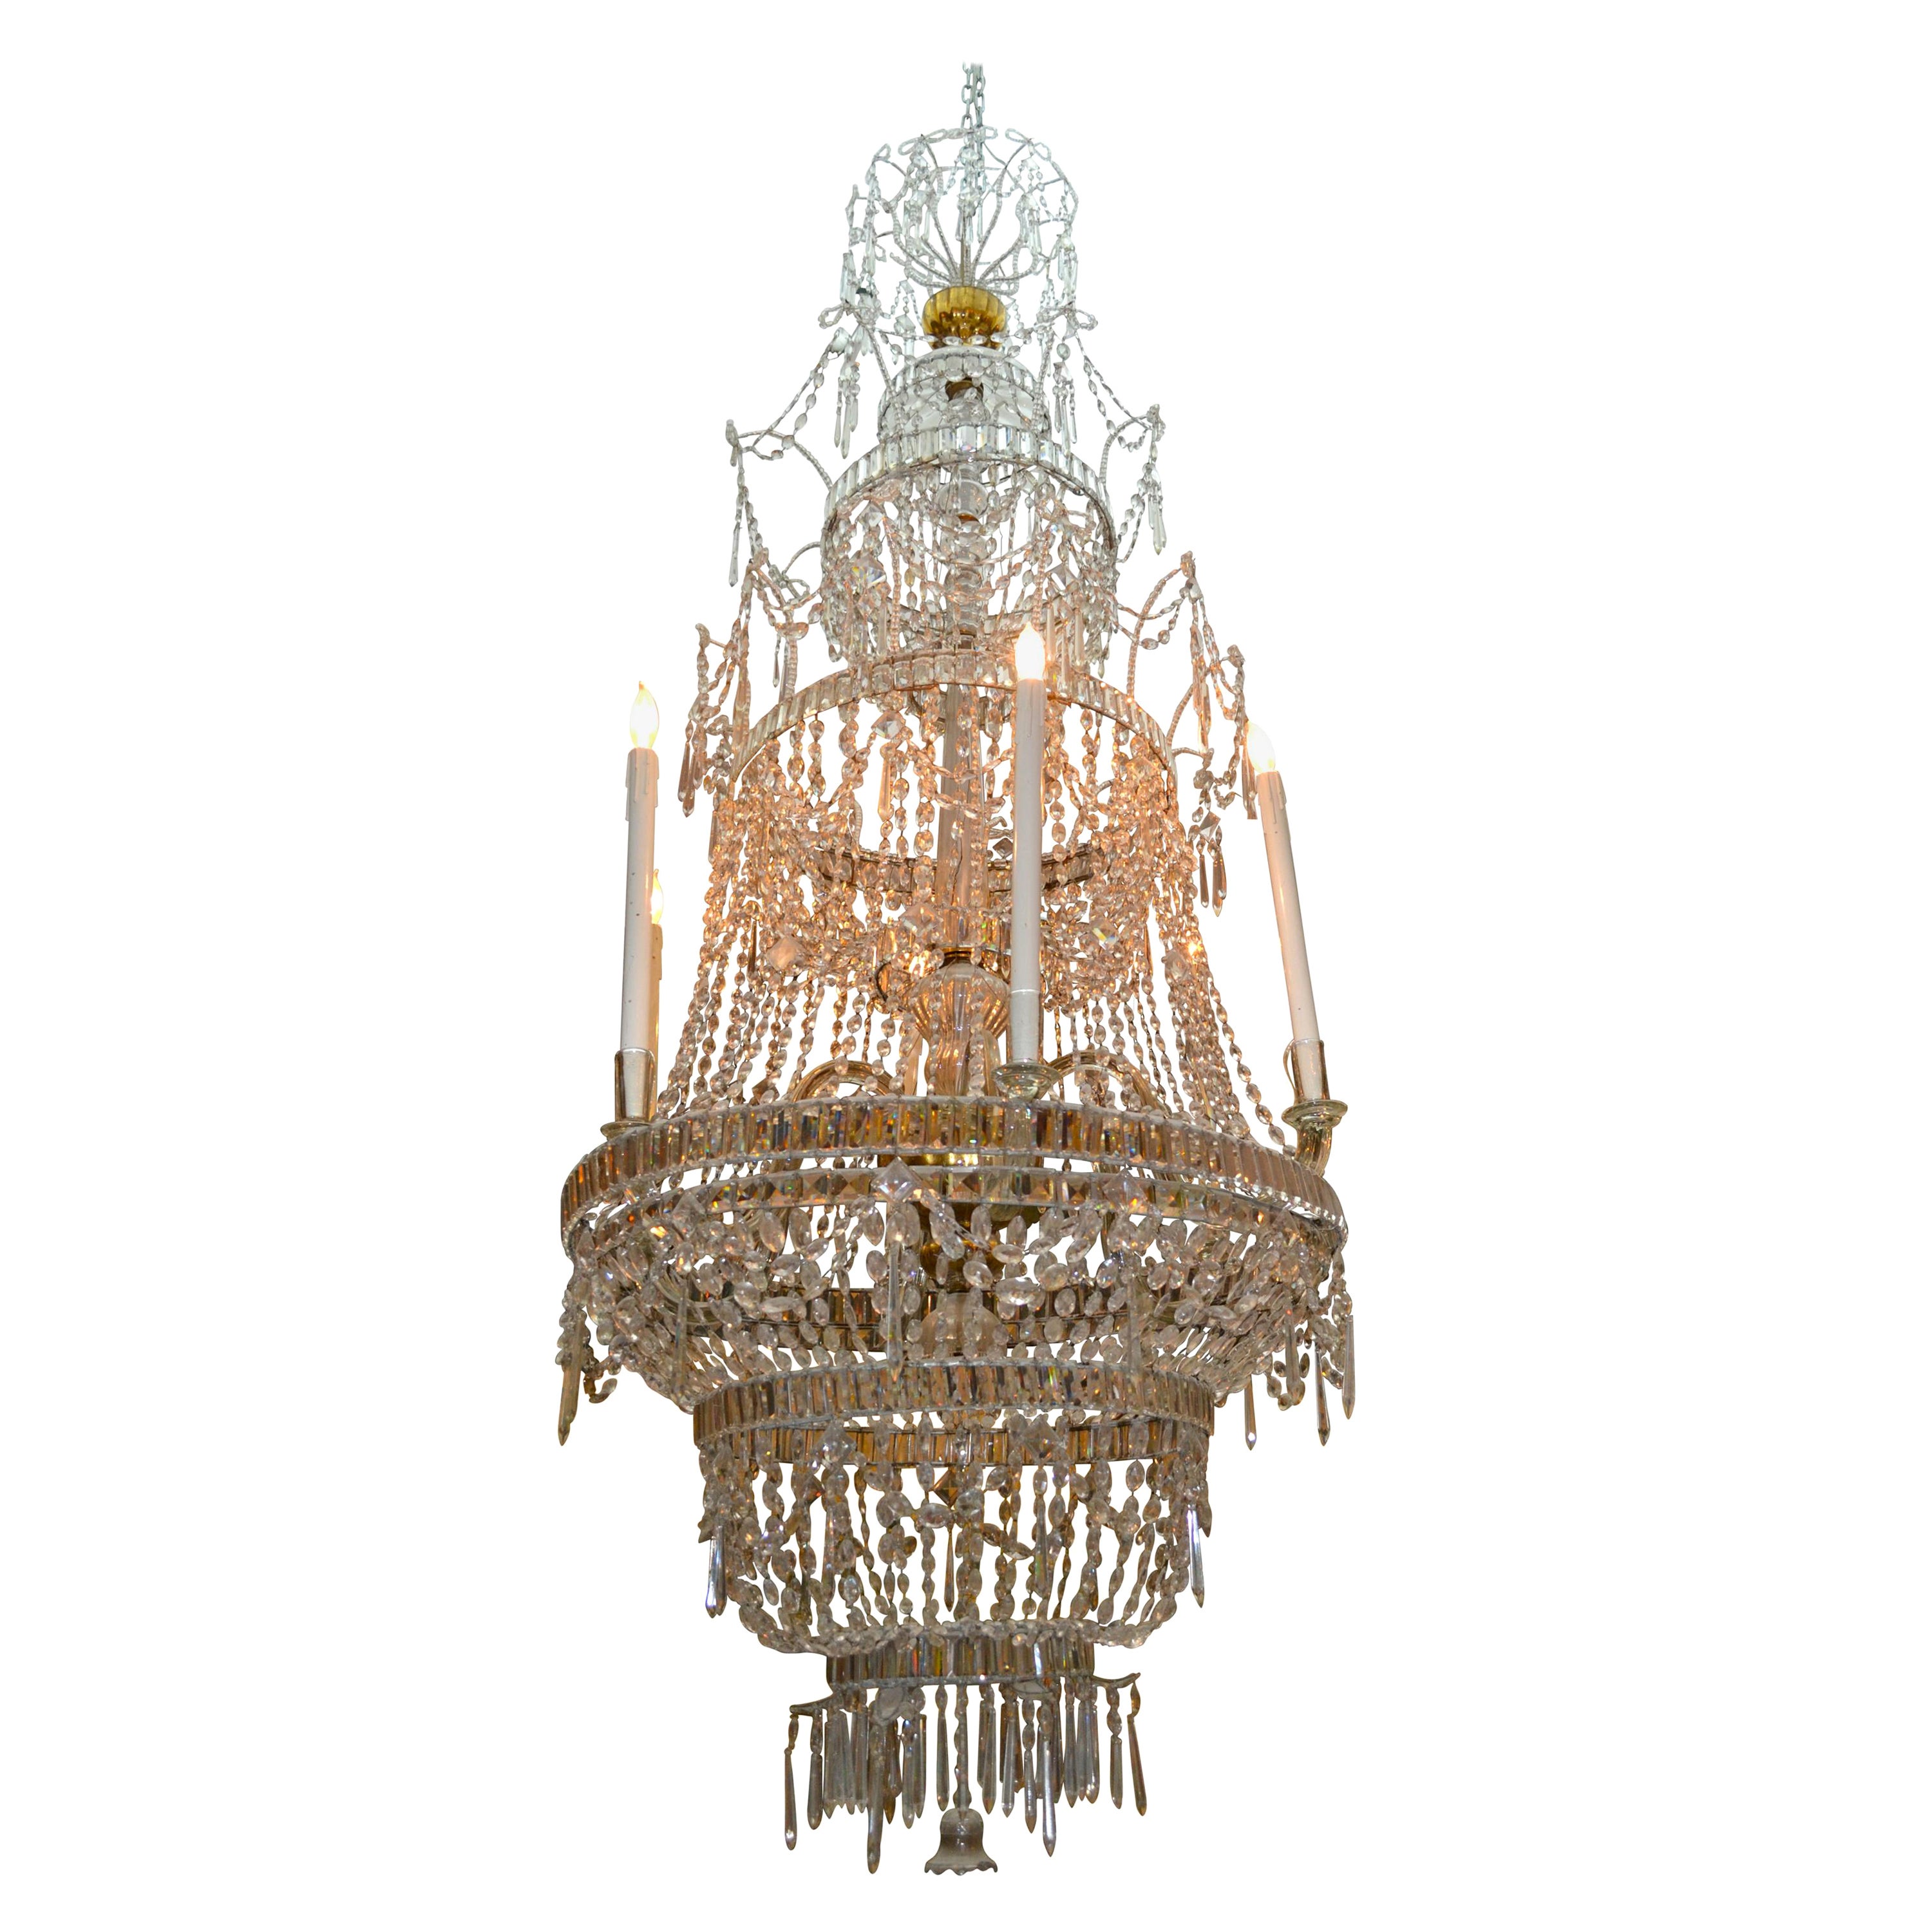 18th Century Crystal Chandelier from the Royal Crystal Manufacturer La Granja For Sale